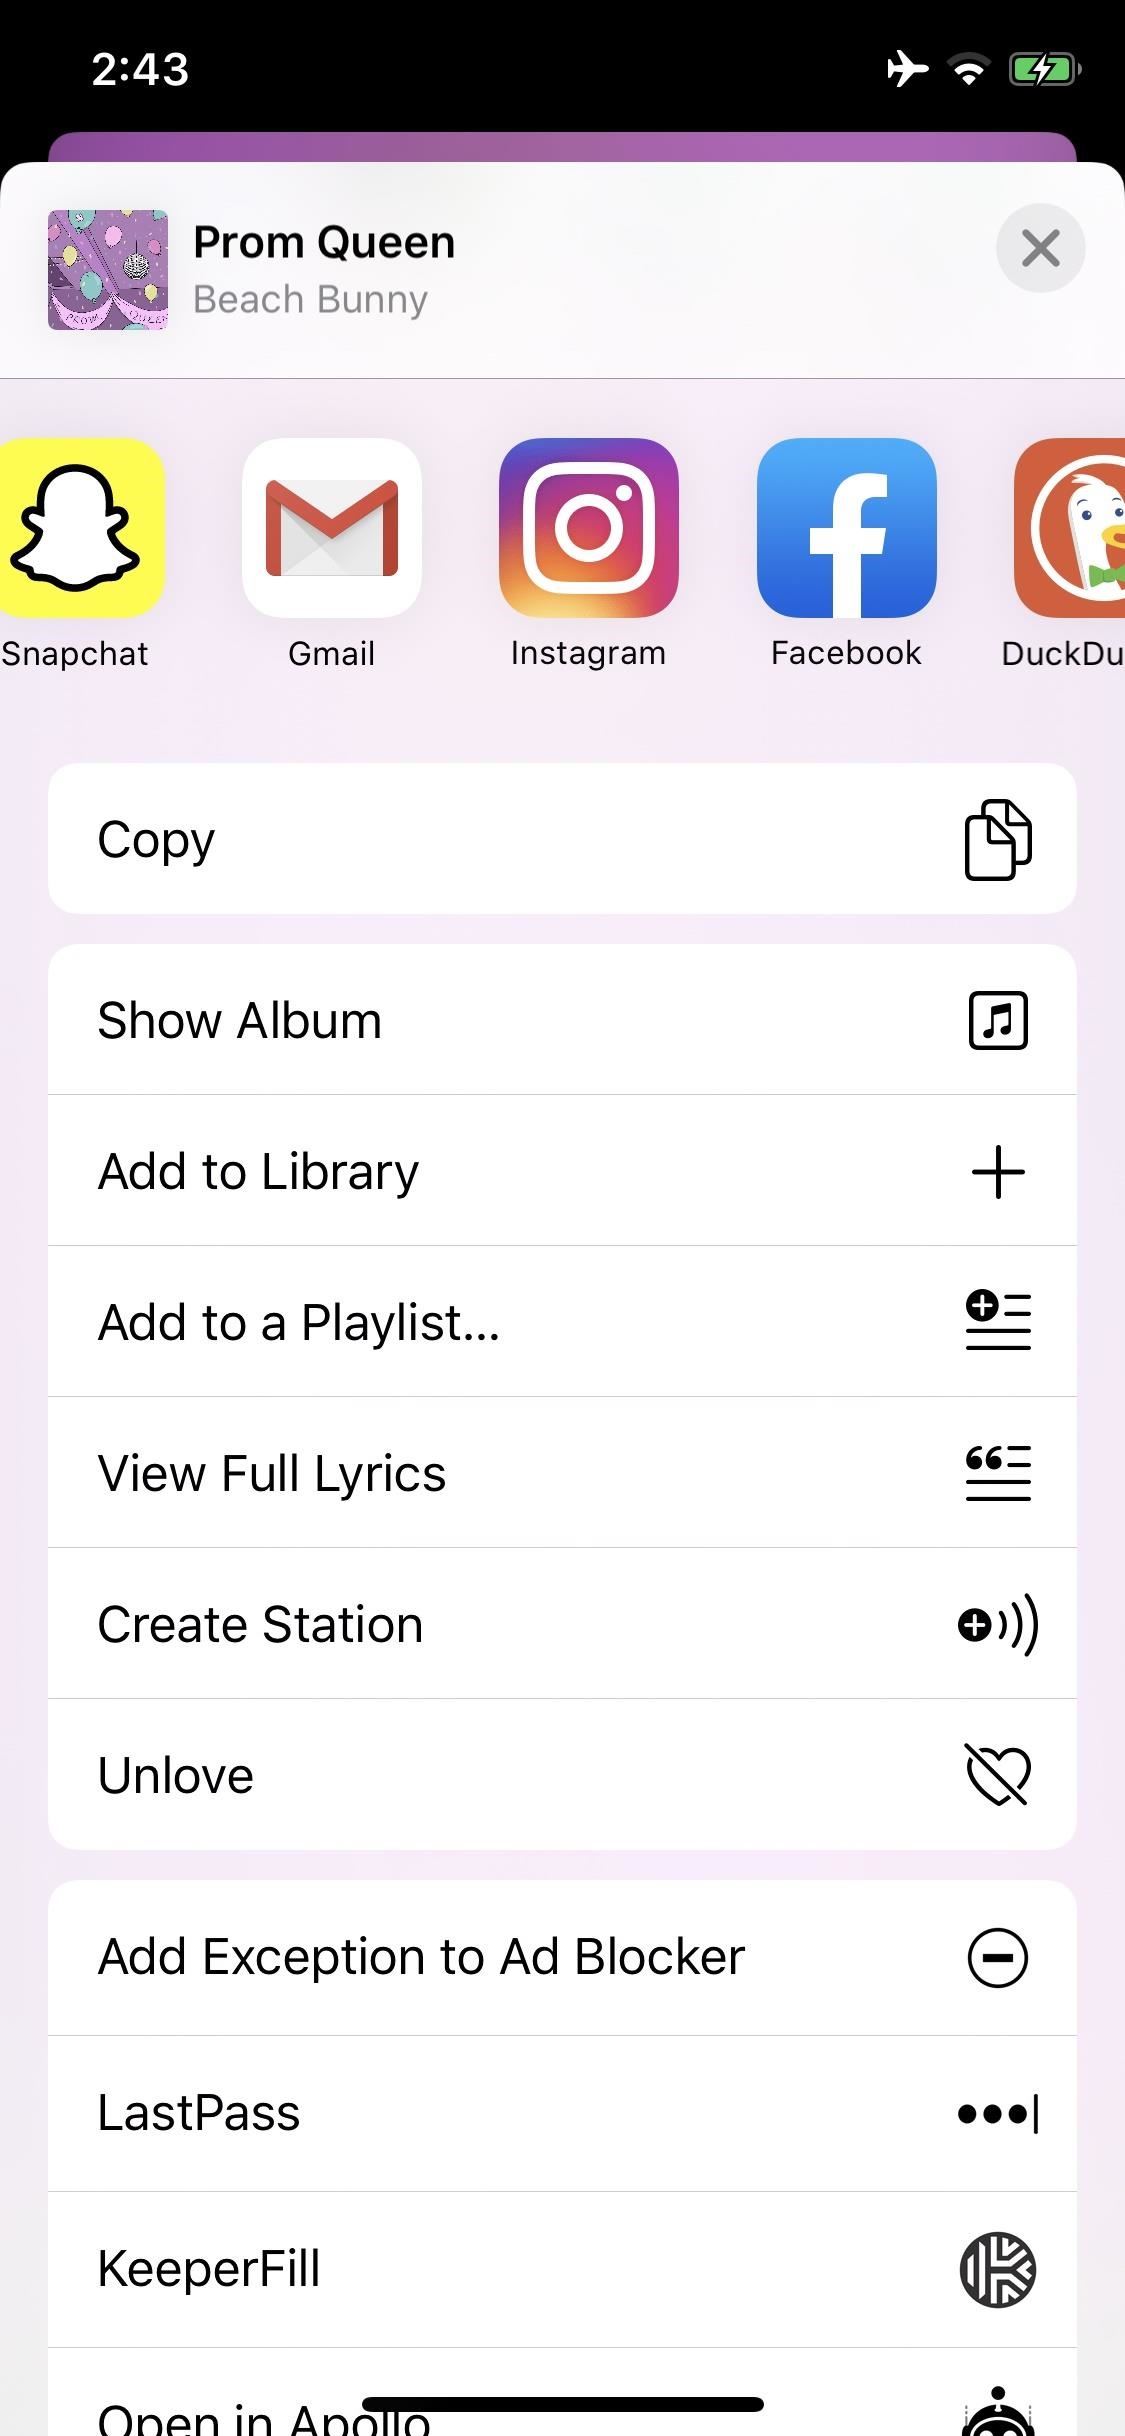 How to Share Apple Music Songs in Your Instagram & Facebook Stories